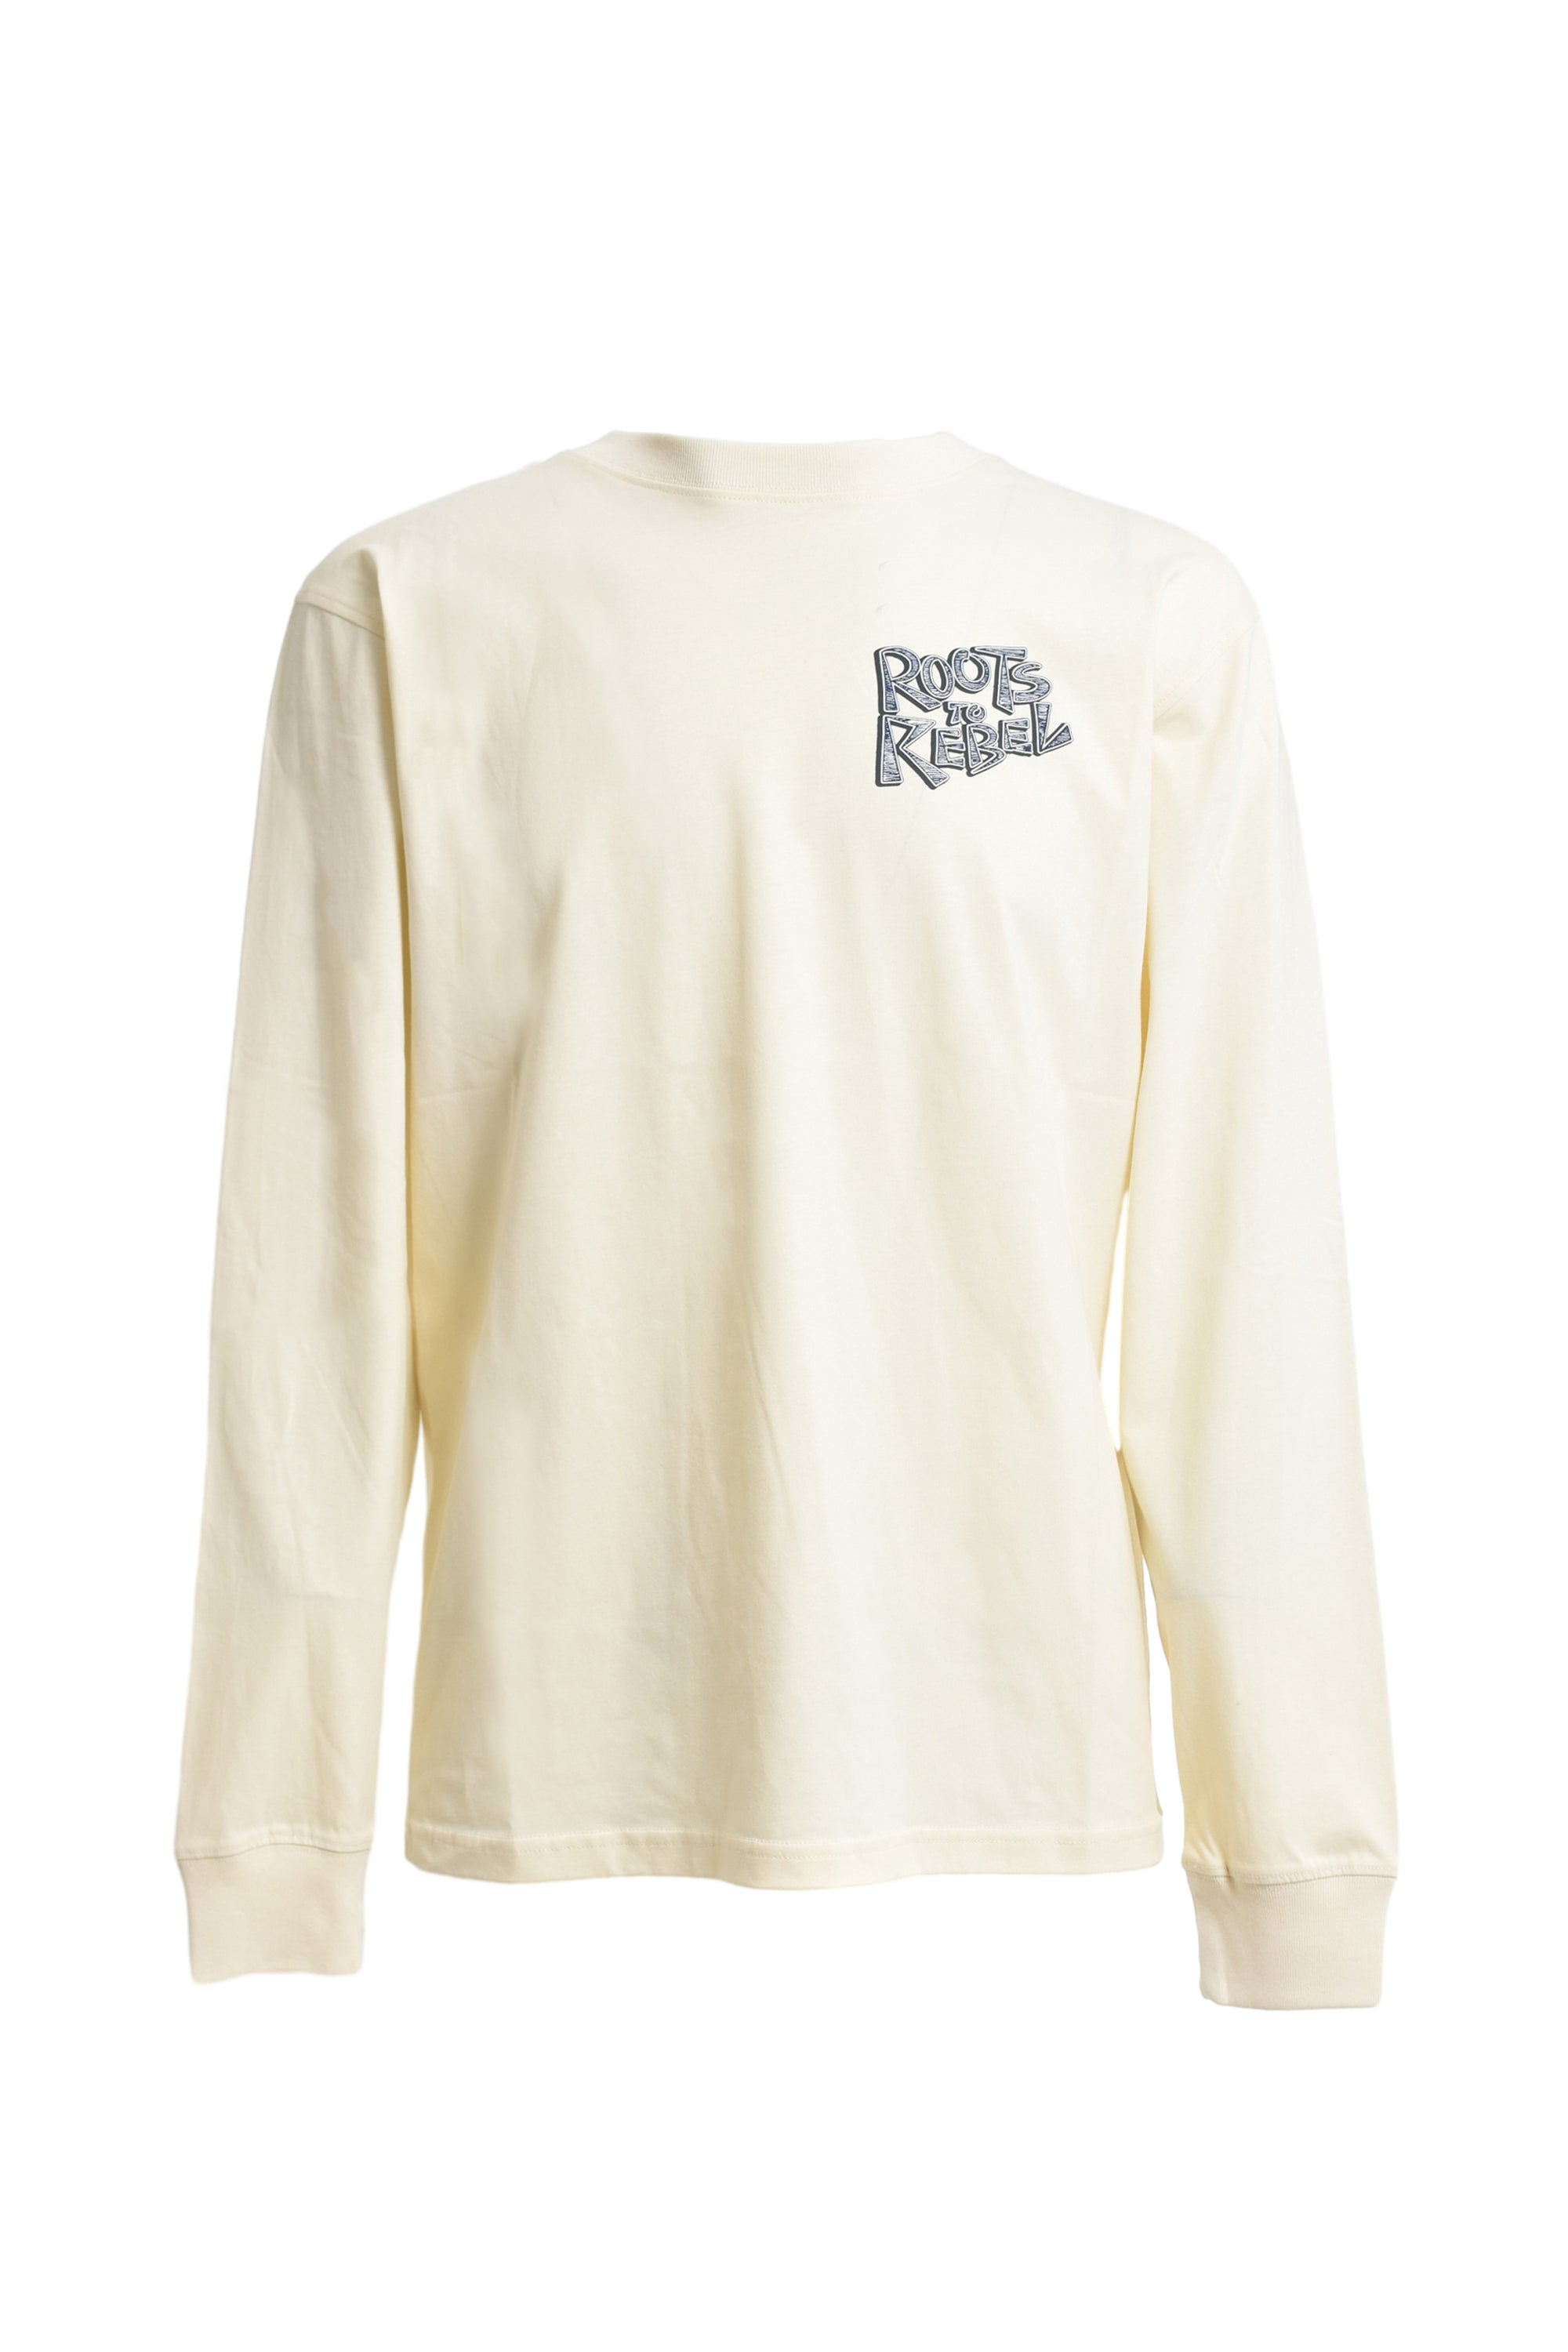 NICHOLAS DALEY ニコラス デイリー FW23 L/S ROOTS TO REBEL T-SHIRT ...